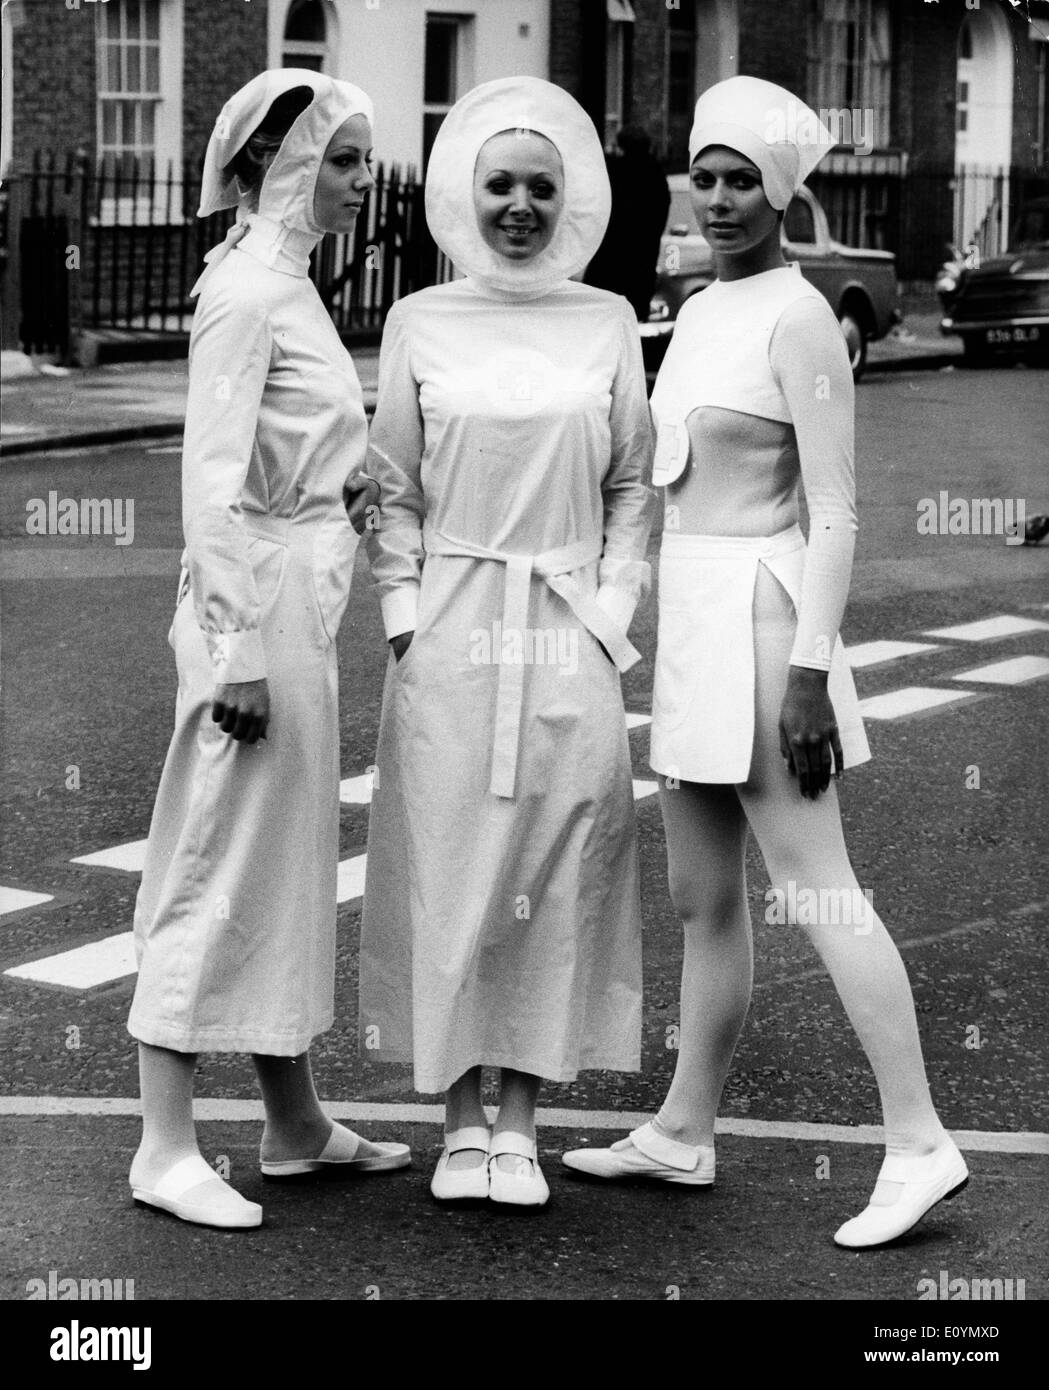 Oct 25, 1970 - London, England, United Kingdom - Models show revolutionary design for new uniforms designed for nurses by Pierre Cardin at the press preview of the London Nursing Exhibition. Cardin designed these uniforms with a new use of colors and design to maximize movement, freedom, and hygiene. Stock Photo